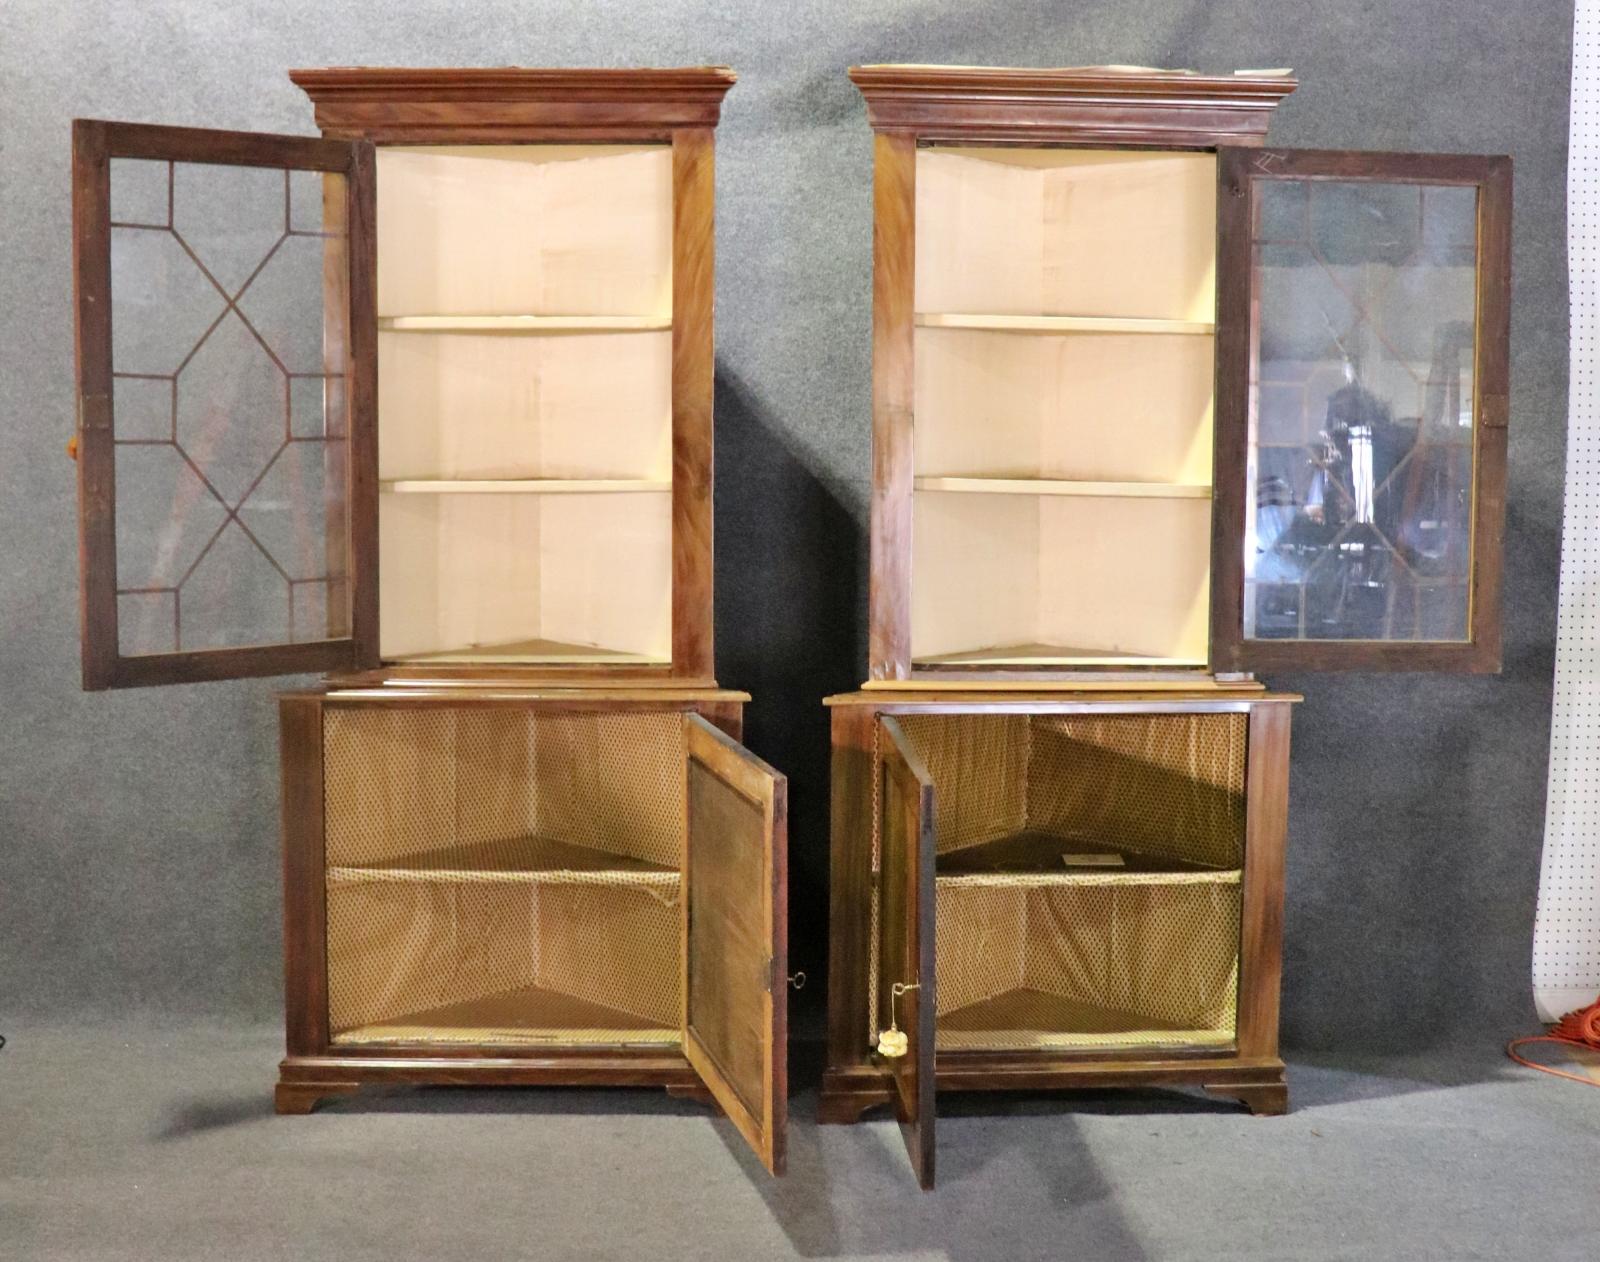 Wood. 2 piece. Top piece has one glass door containing 2 shelves and measures 48 3/8